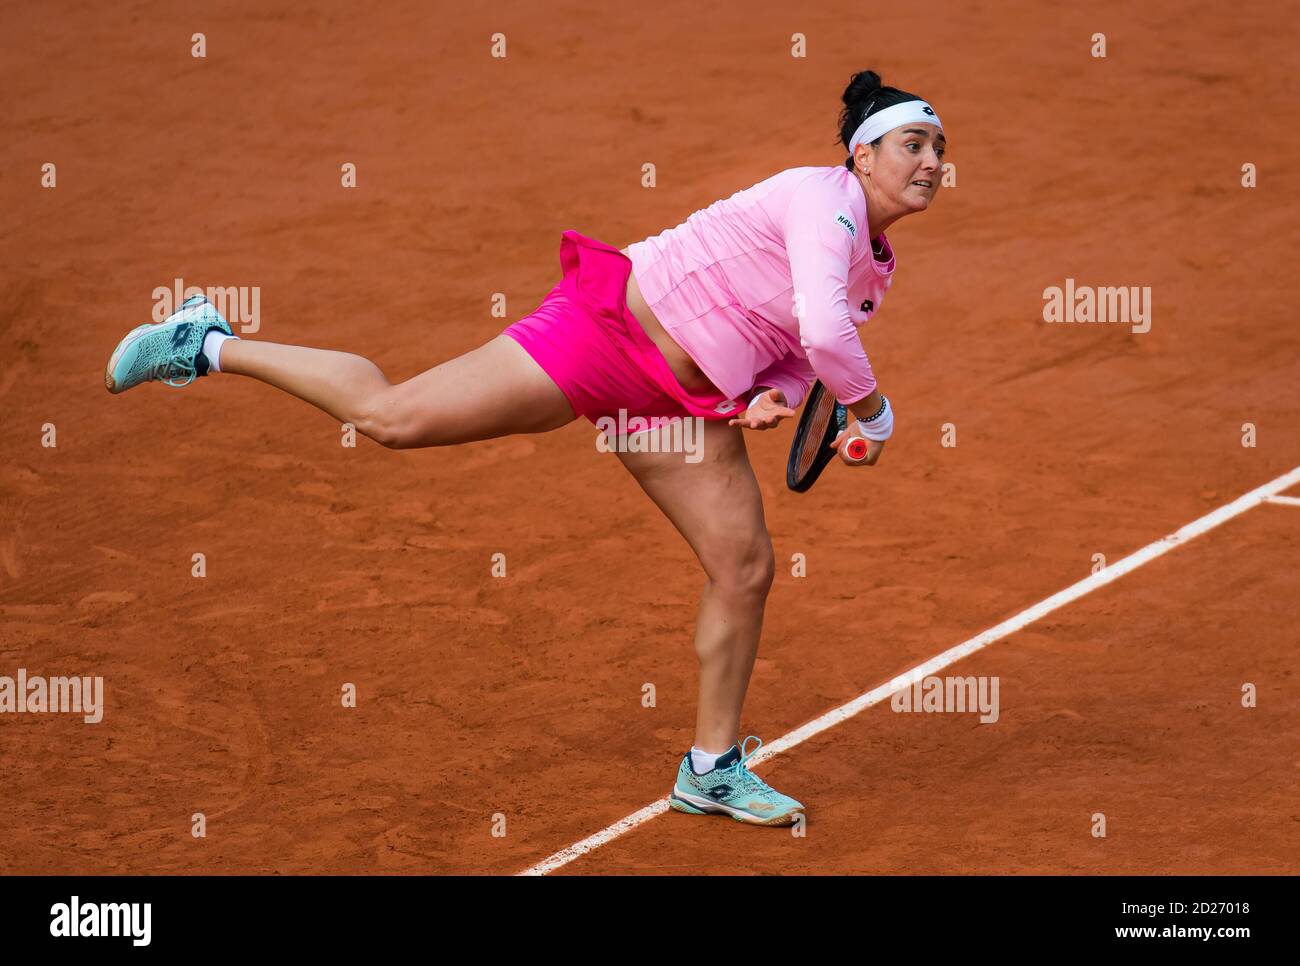 Paris, France. 6th October, 2020. Ons Jabeur of Tunisia in action against Danielle Collins of the United States during the quarter-finals at the Roland Garros 2020, Grand Slam tennis tournament, on October 6, 2020 at Roland Garros stadium in Paris, France - Photo Rob Prange / Spain DPPI / DPPI Credit: LM/DPPI/Rob Prange/Alamy Live News Stock Photo